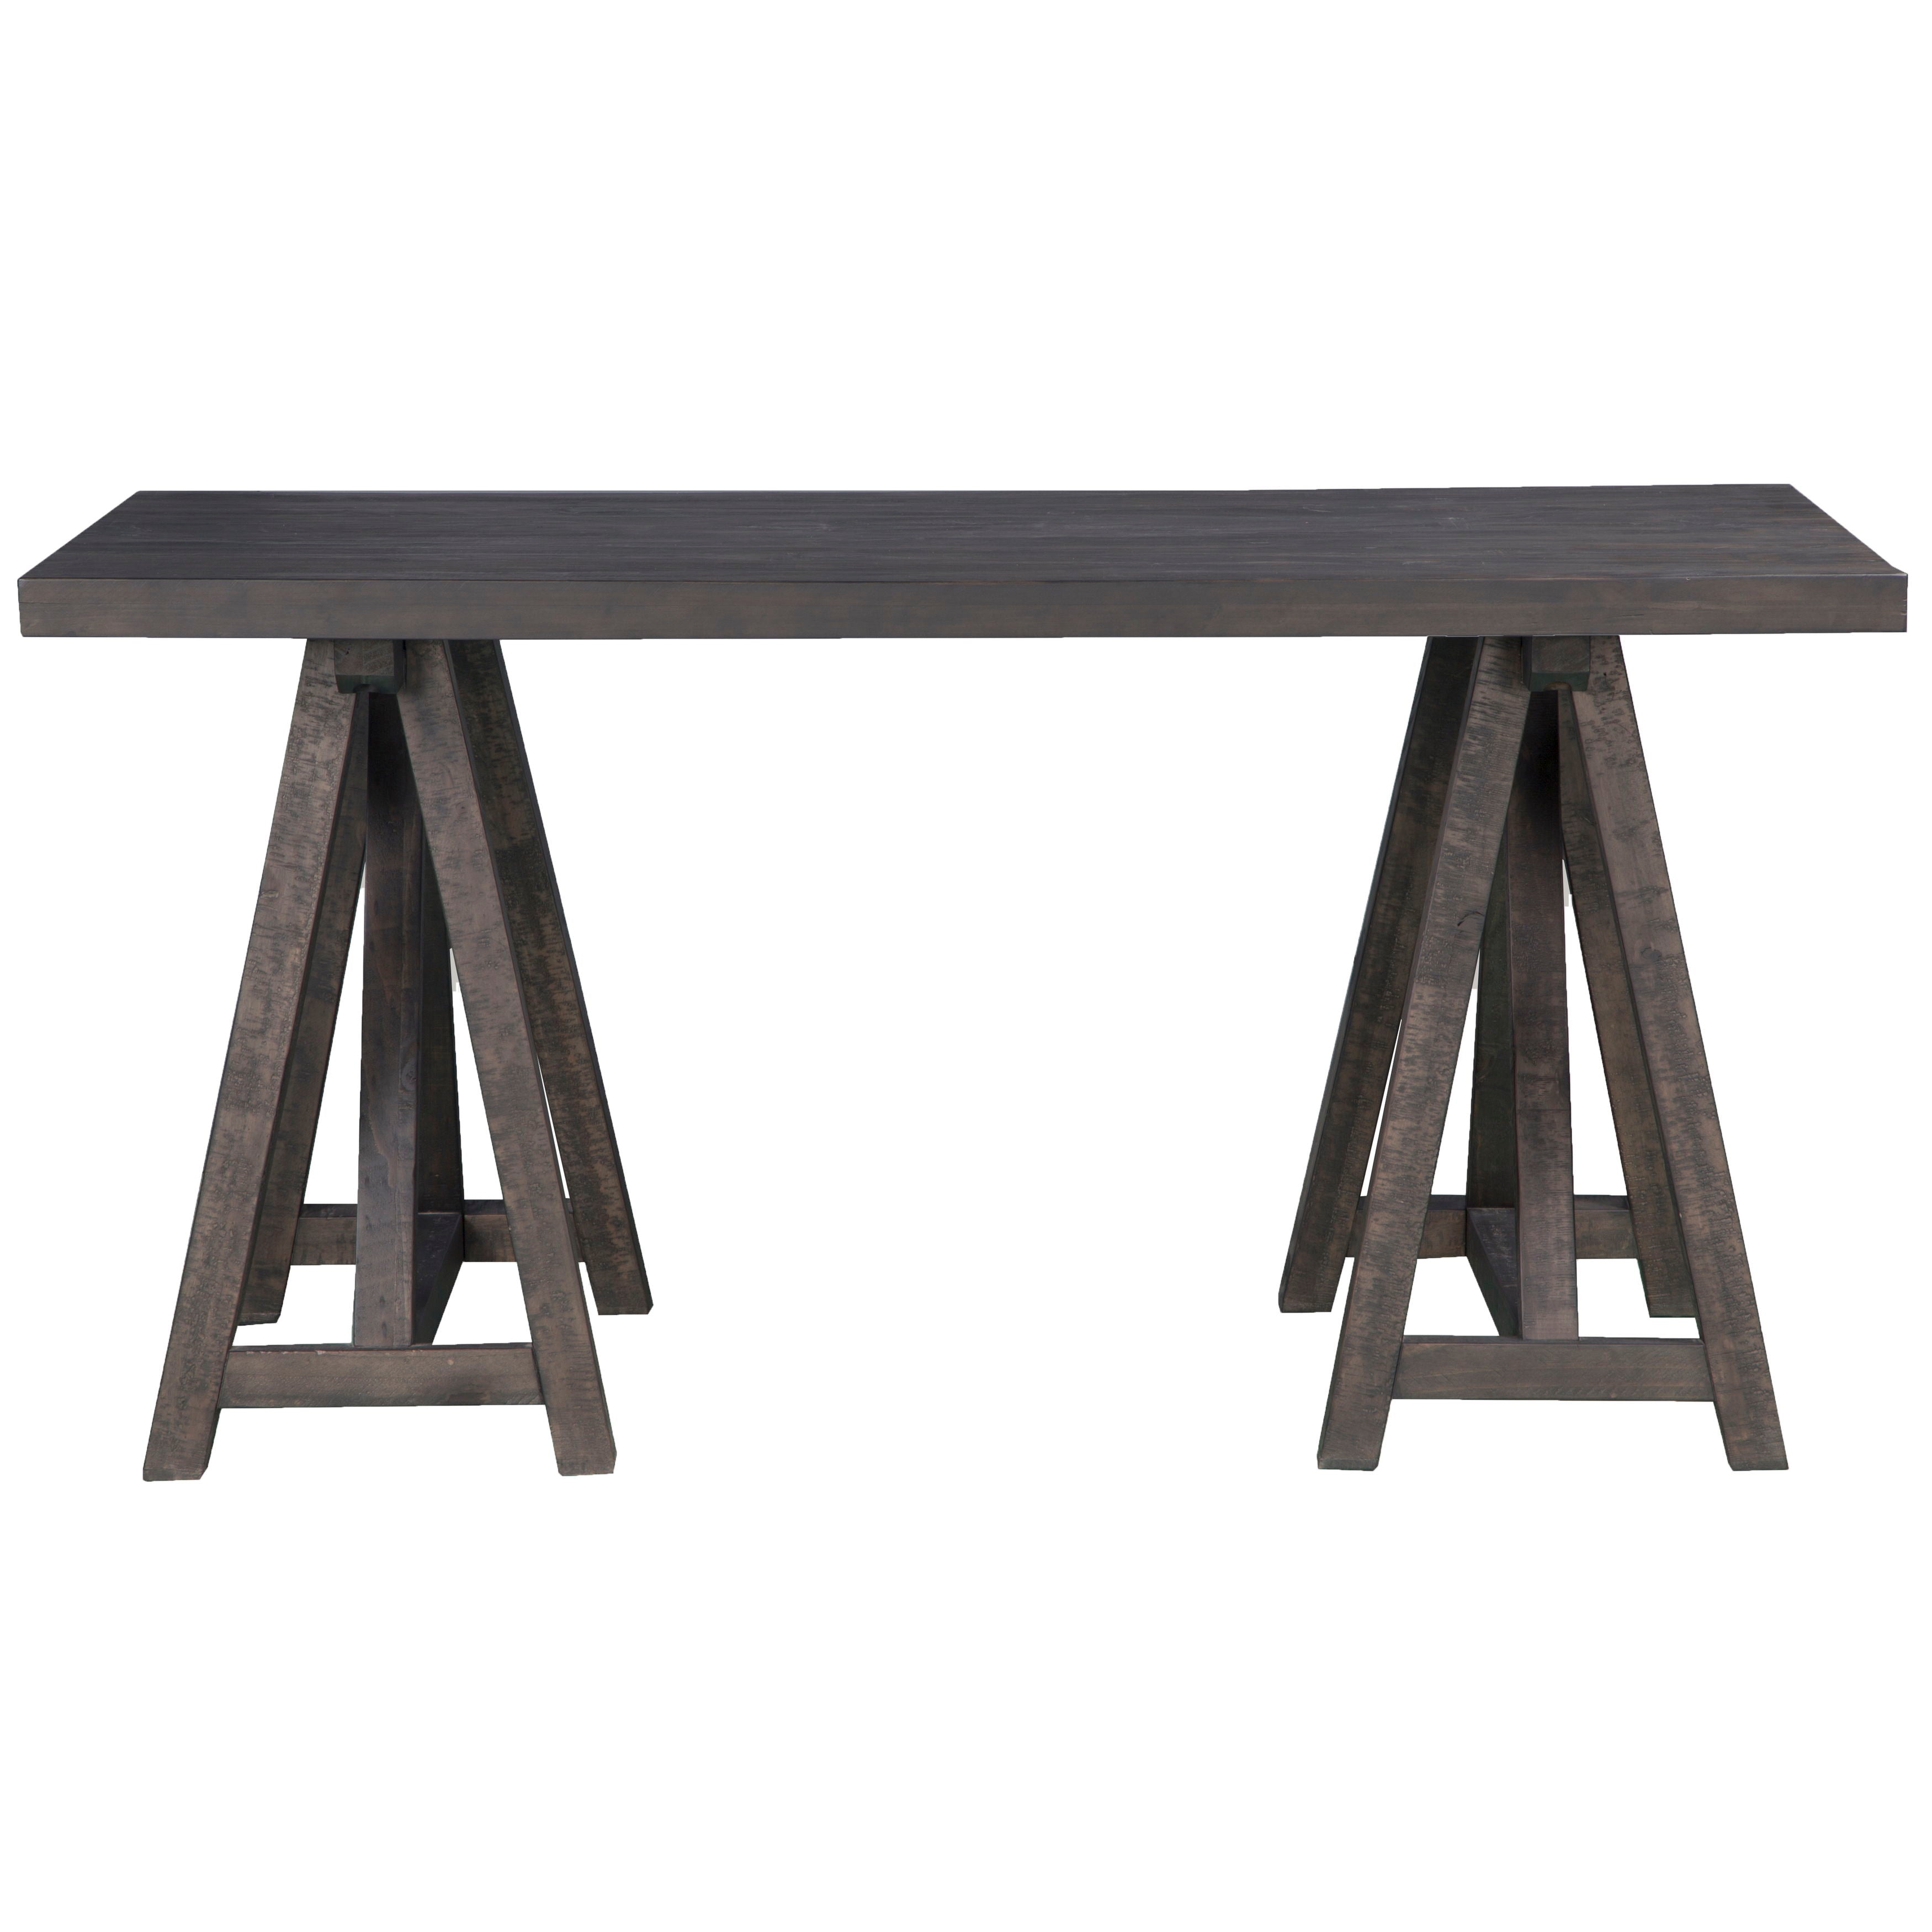 Sutton Place - Desk - Weathered Charcoal